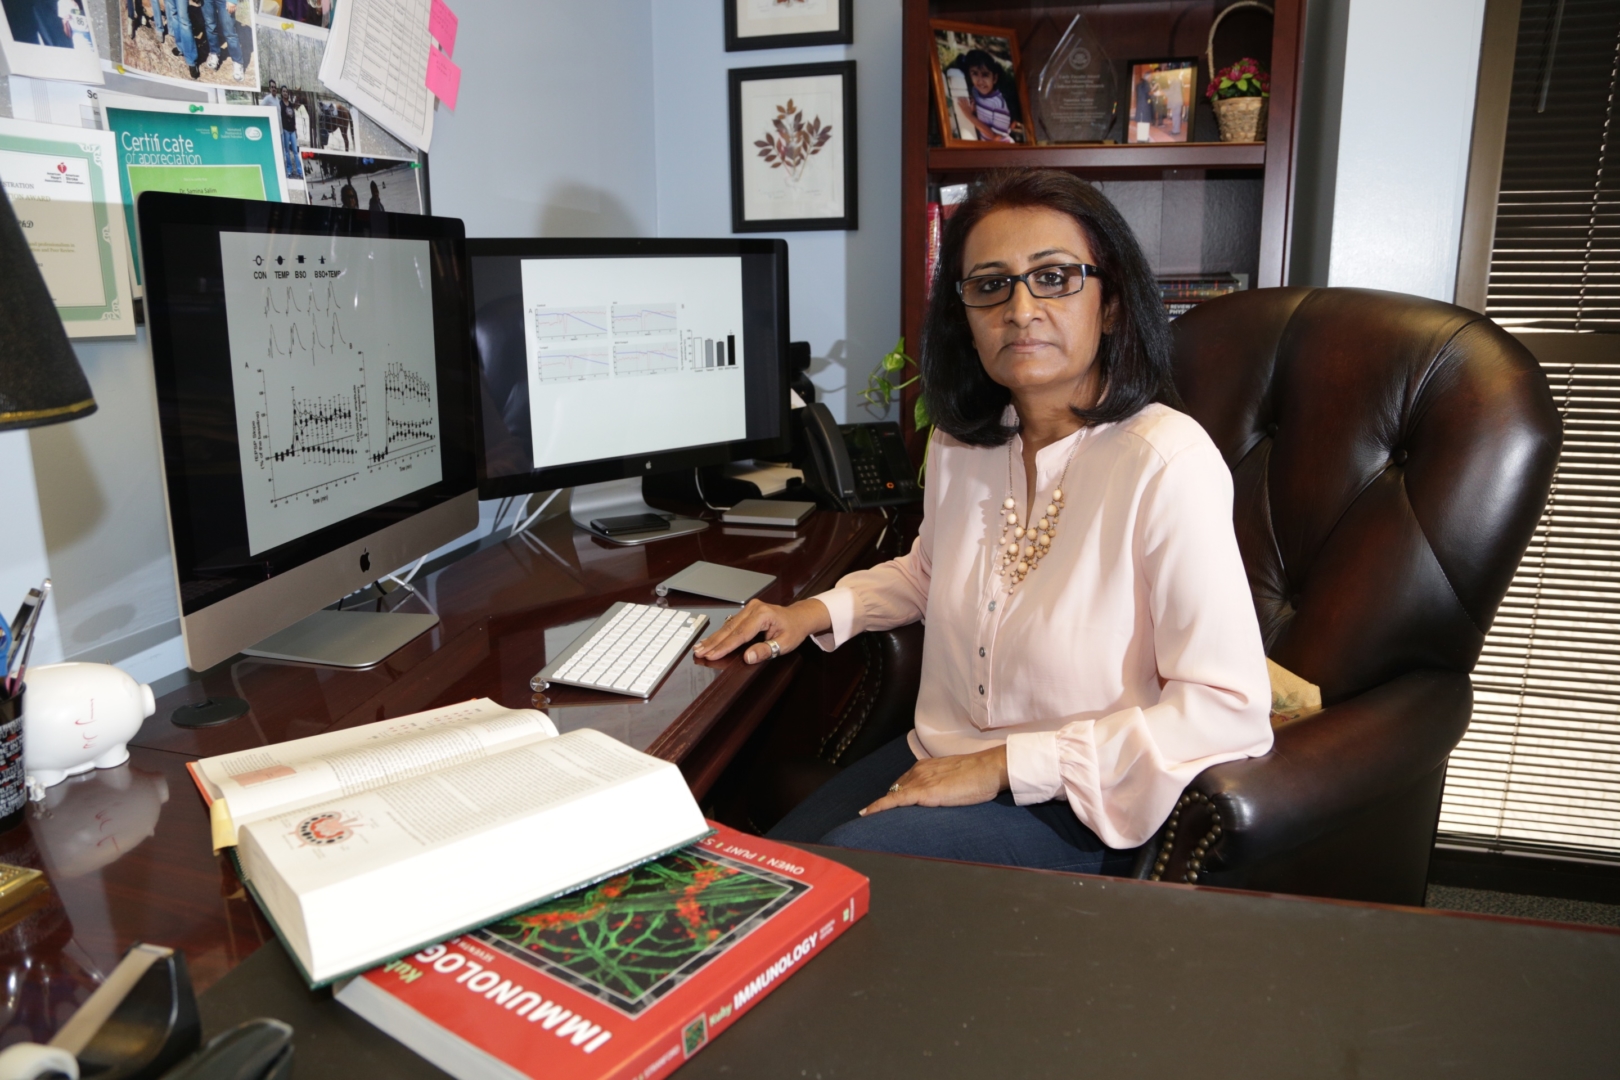 Pharmacology professor Samina Salim hopes for a world free of hate and questions if we are ready to change and heal. | Courtesy of Samina Salim